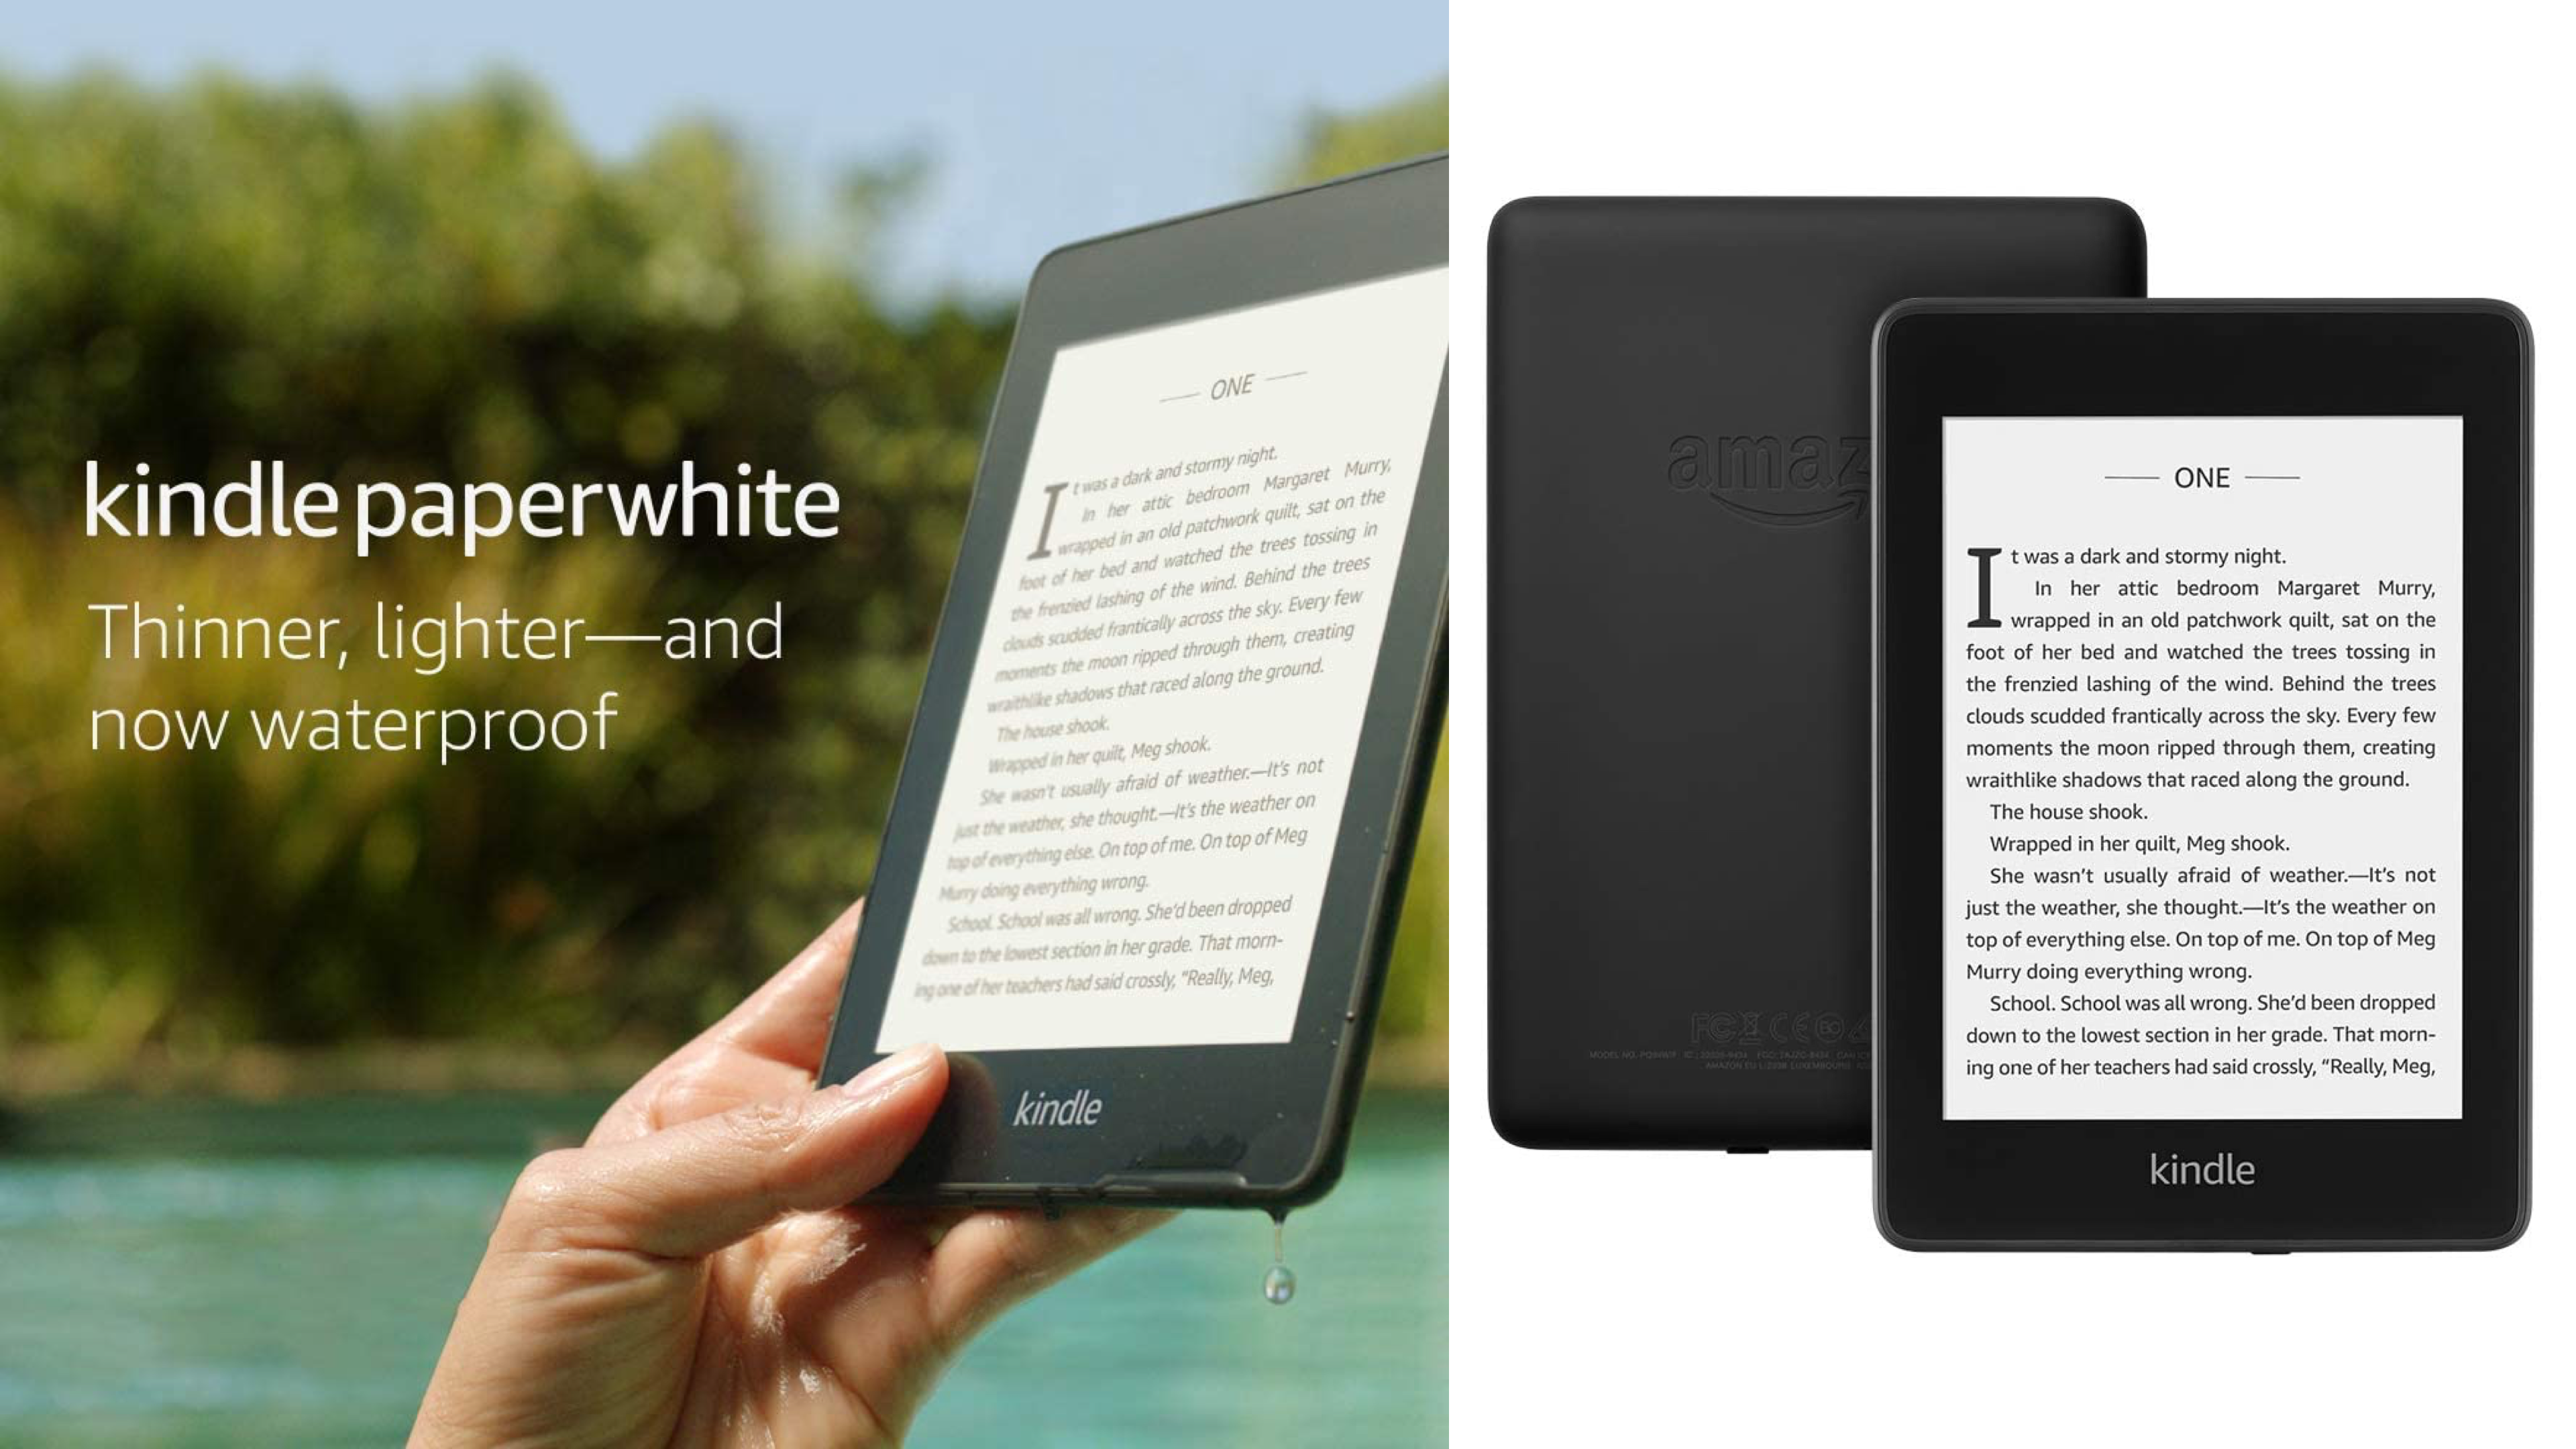 kindle paperwhite that's lightweight and waterproof for everyday reading